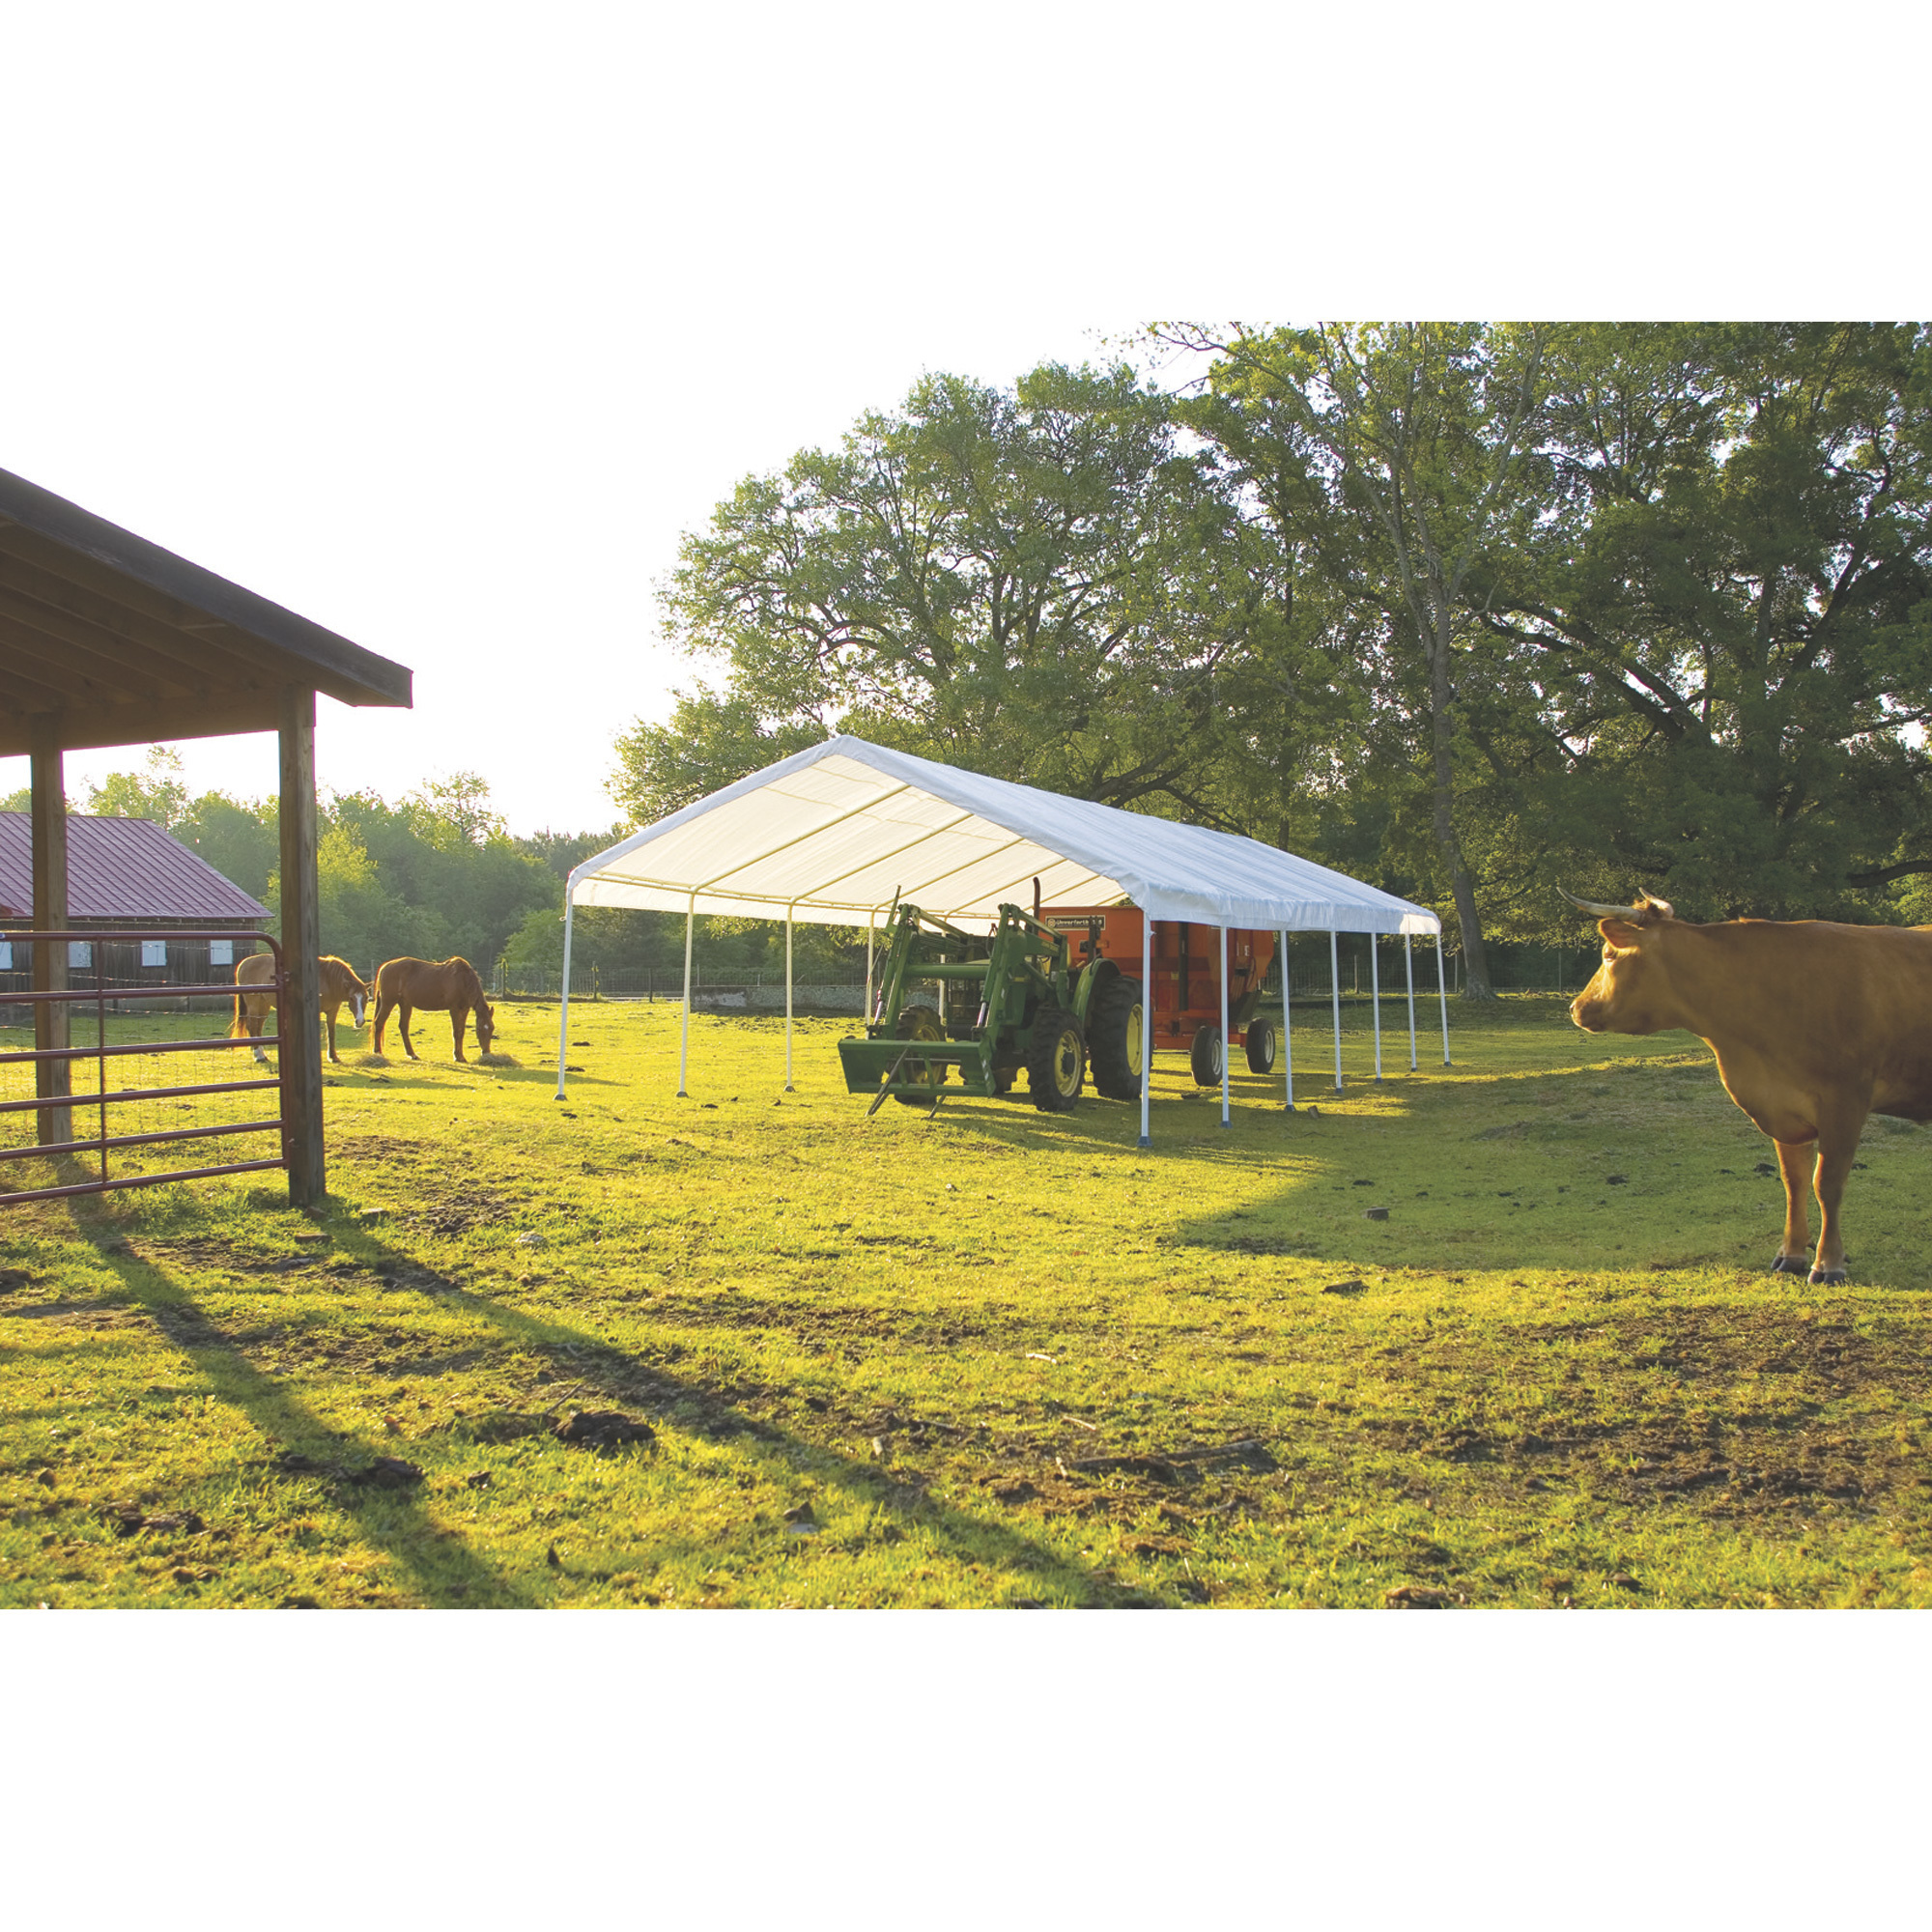 Super Max Commercial Outdoor Canopy — 40ft.L x 18ft.W x 11ft.H, Model - ShelterLogic 26764